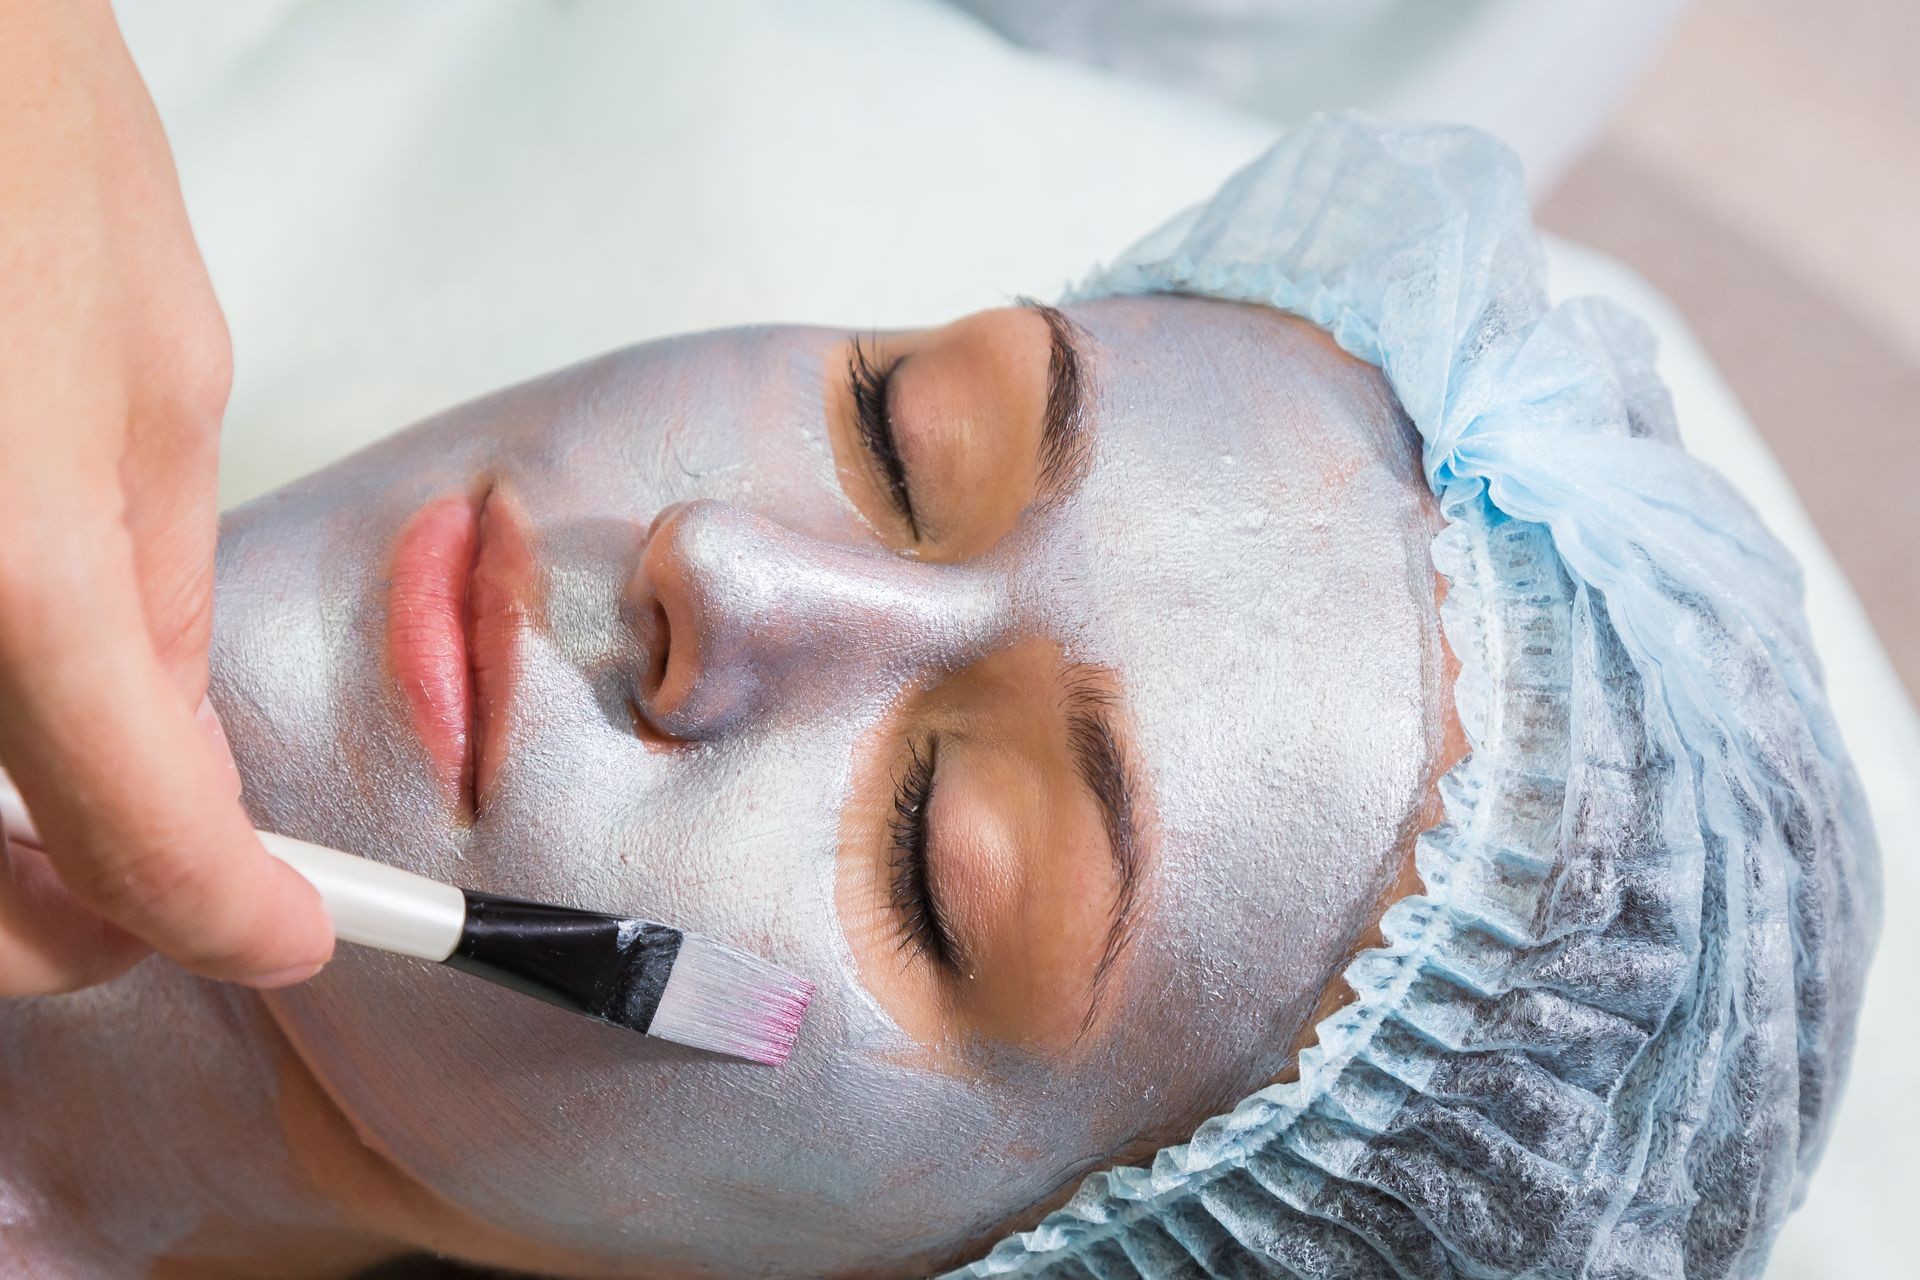 Young woman at spa procedures applying mask. Therapist applying a face mask to the face of a beautiful young  woman using a cosmetic brush.Cosmetology,facial, beauty - The concept of facial skin care.